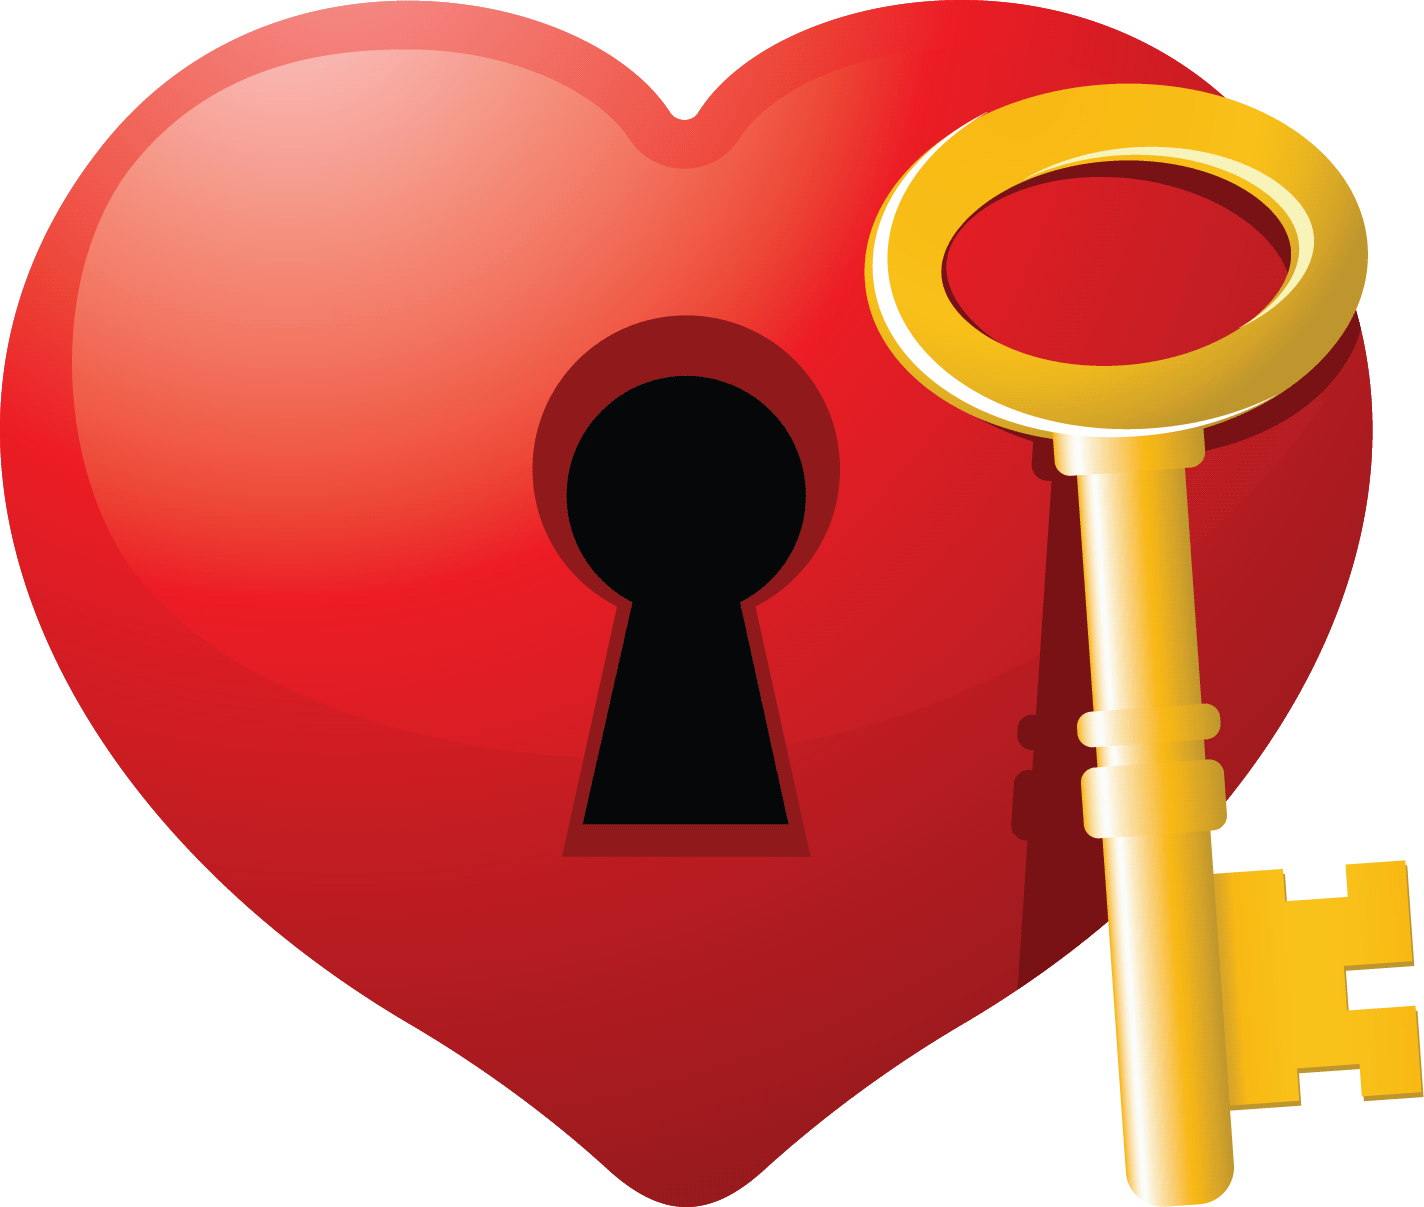 22 Broken Heart Clip Art Free Cliparts That You Can Download To You    